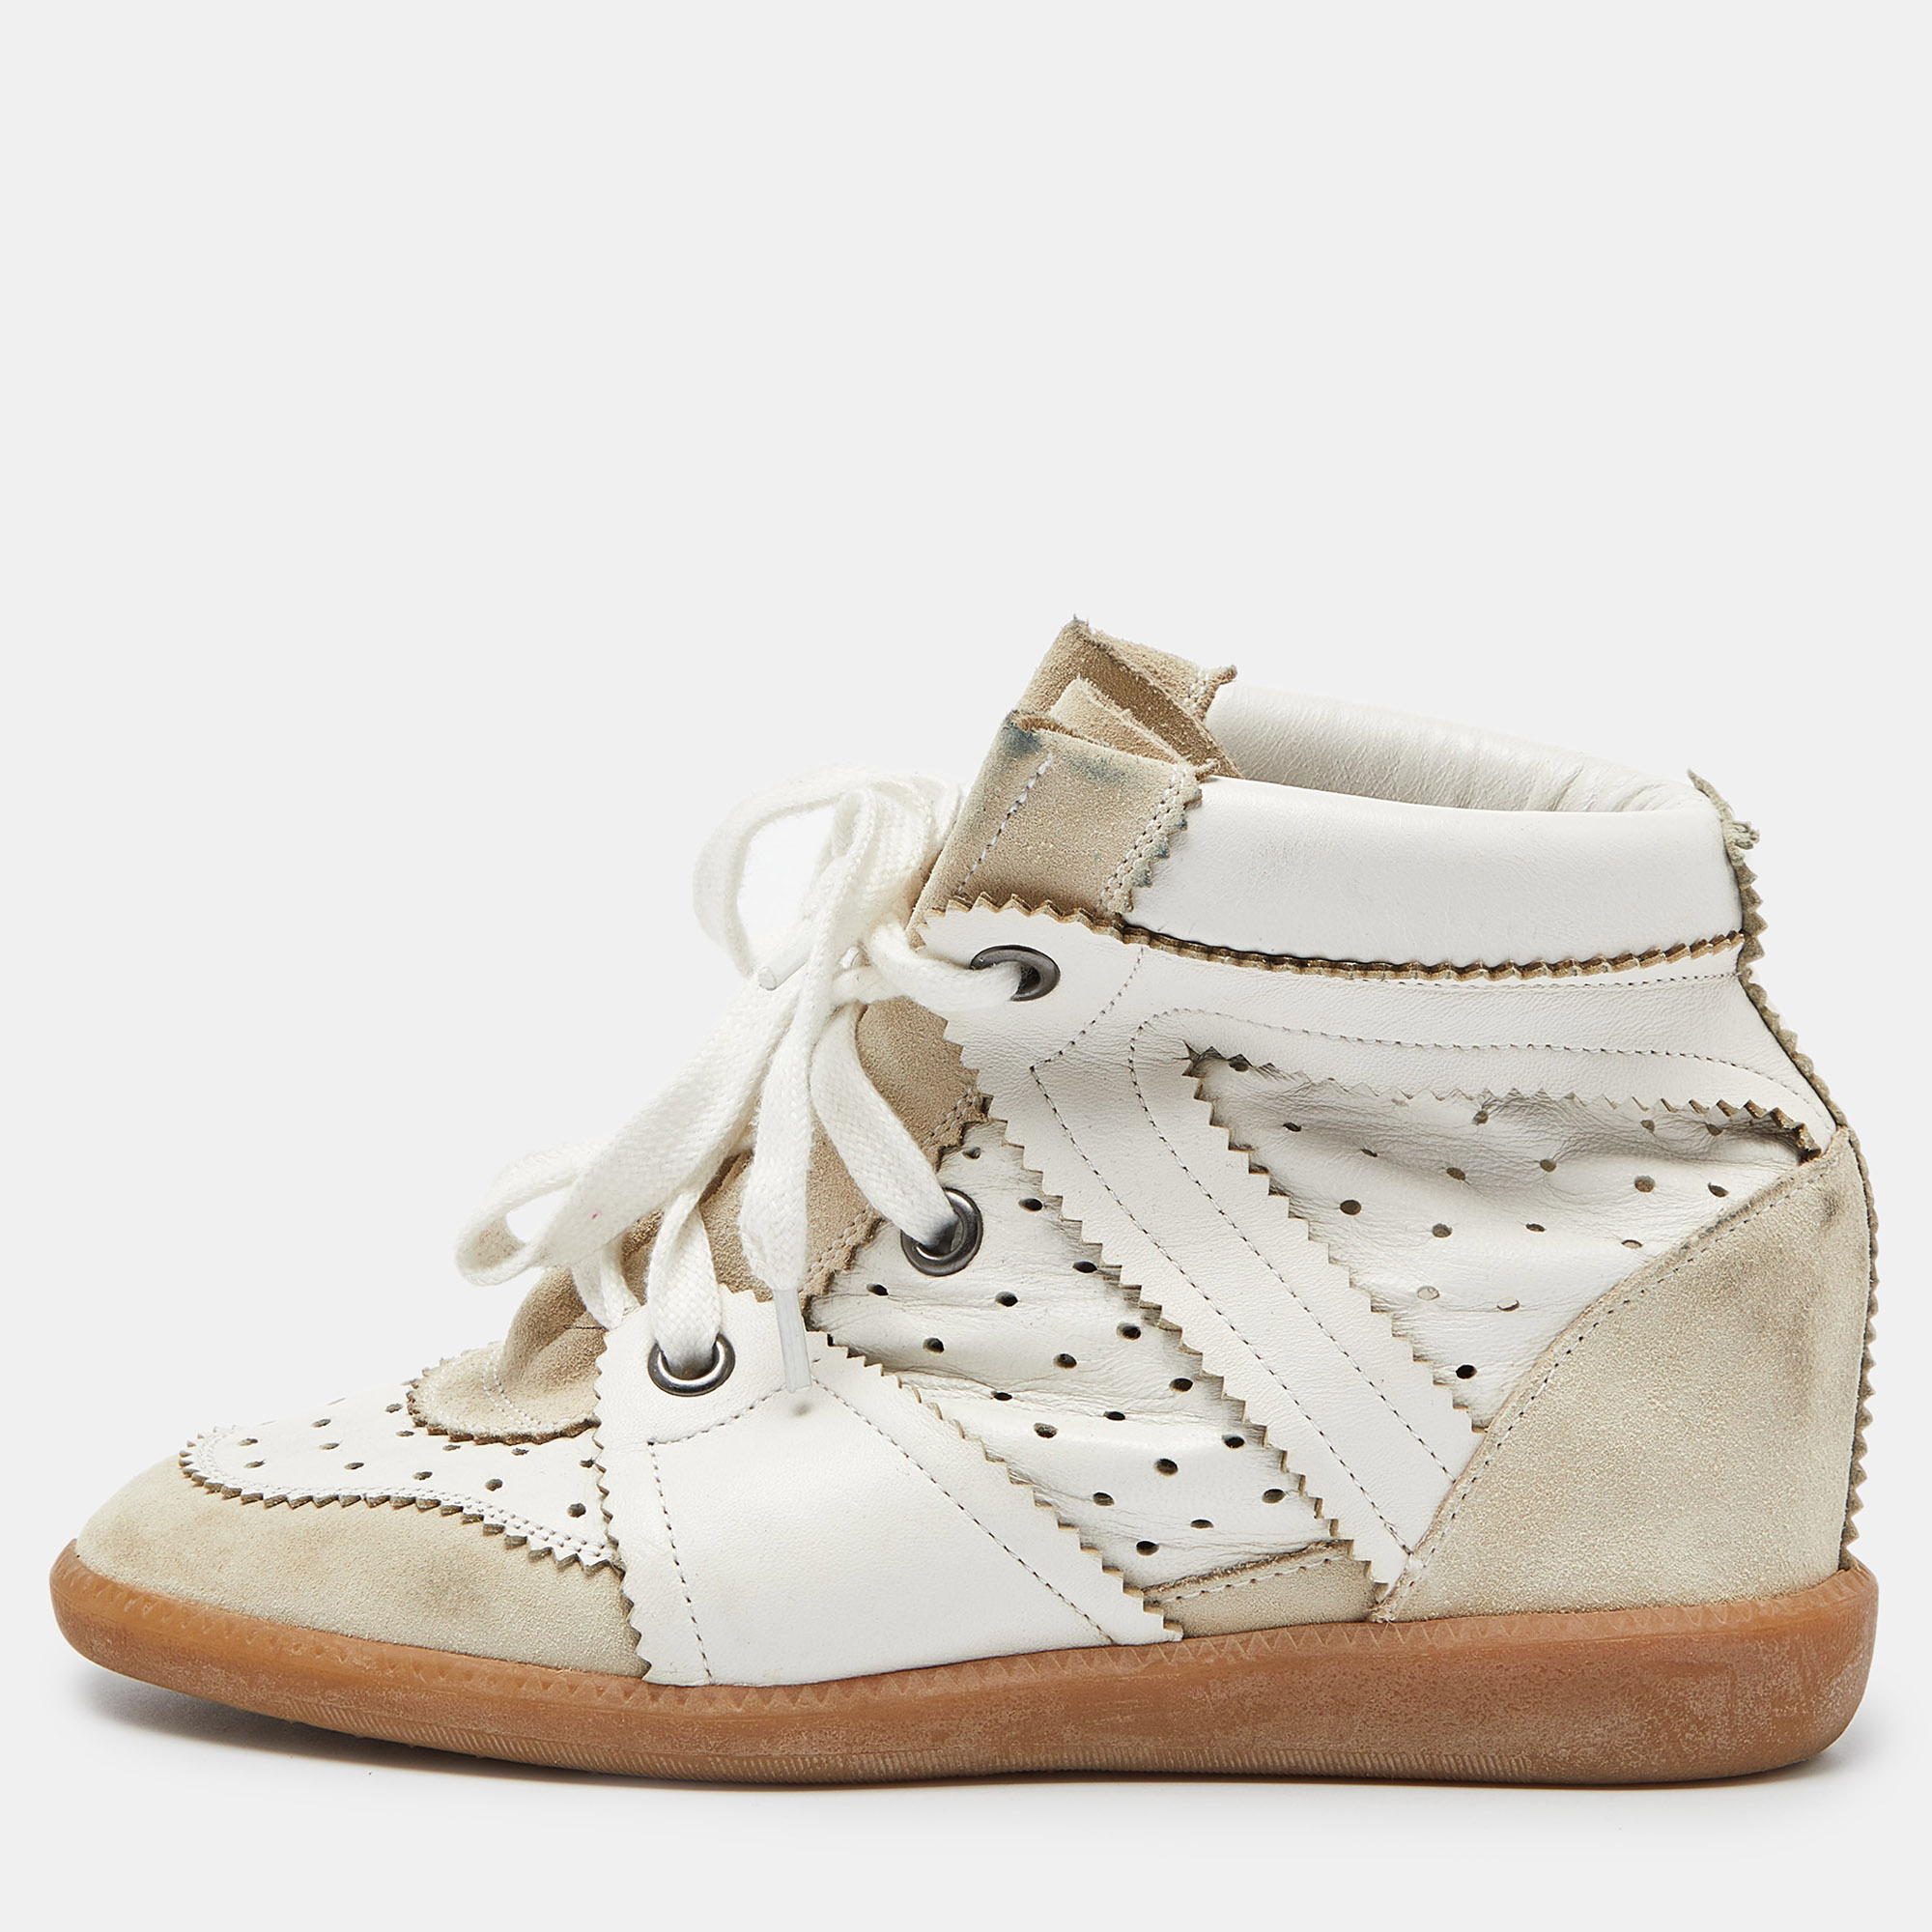 Pre-owned Isabel Marant White/cream Perforated Leather And Suede Baya Wedge Sneakers Size 39